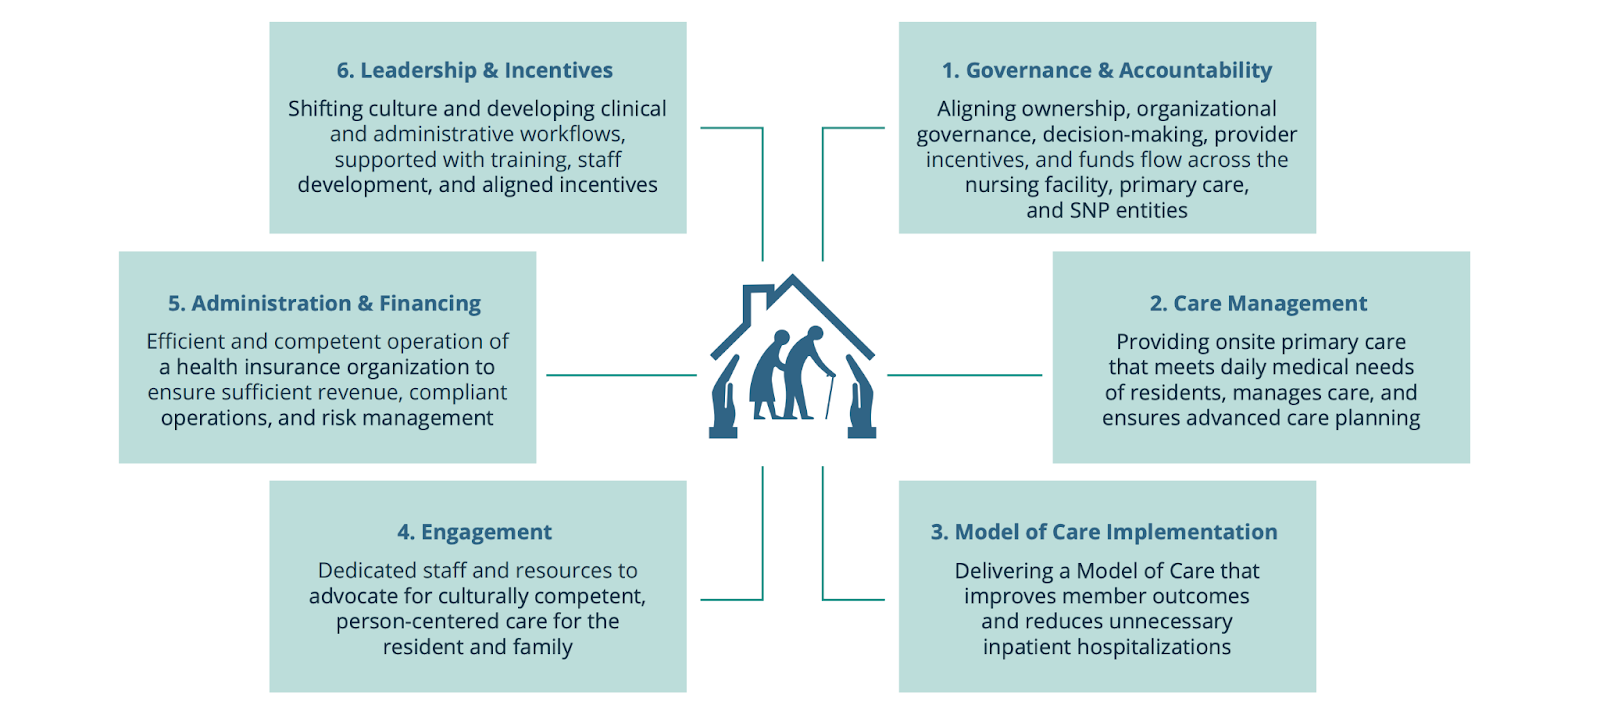 A case study that revealed six competencies necessary to achieve care, quality, and financial objectives